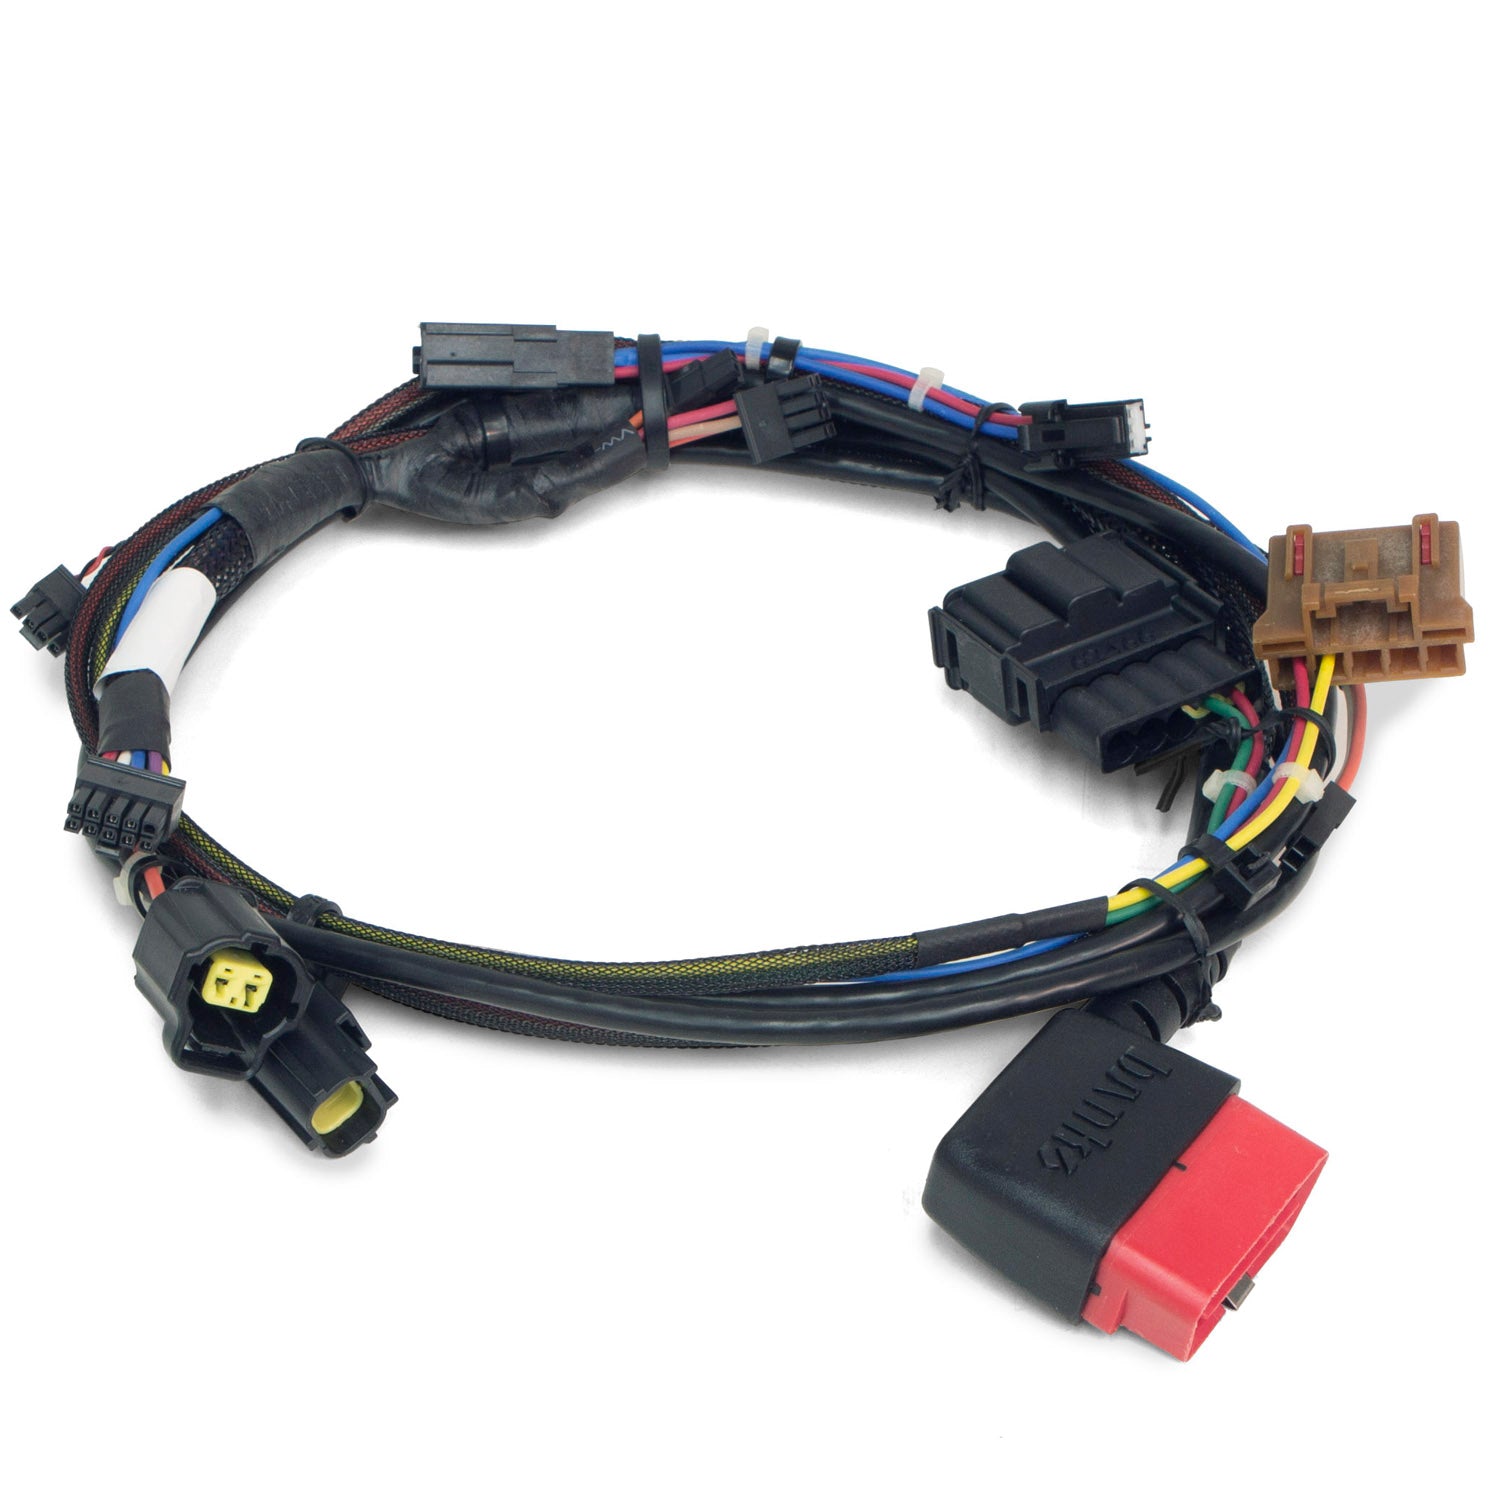 Harness used for with EconoMind Diesel Tuner